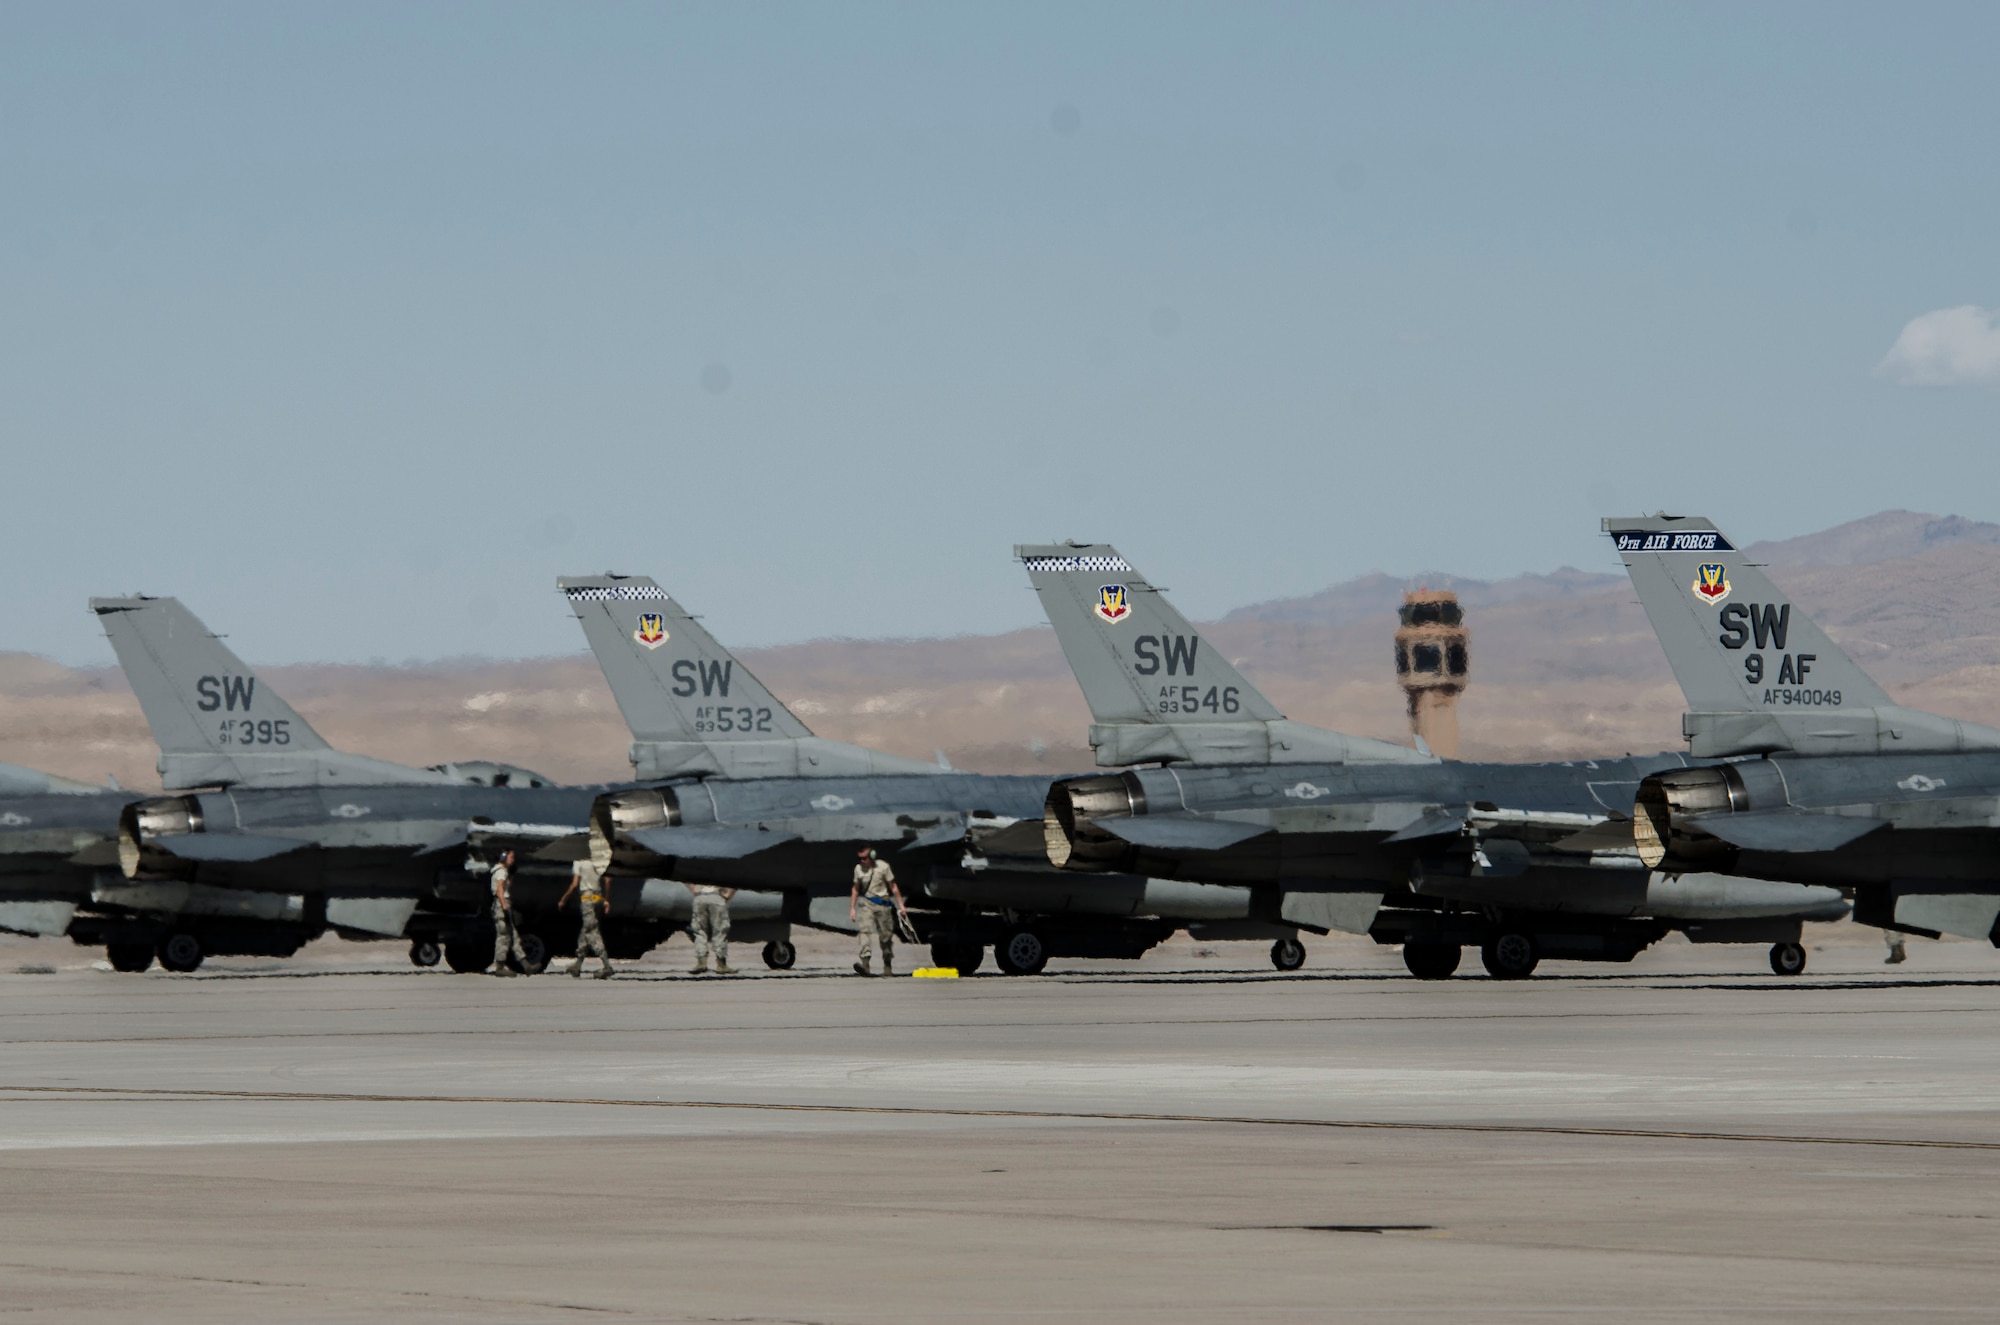 U.S. Air Force maintainers from the 20th Fighter Wing, Shaw Air Force Base, S.C., ready F‐16CM Fighting Flacons, 55th Fighter Squadron, Shaw Air Force Base, S.C., for takeoff at Nellis Air Force Base, Nev., Aug. 13, 2016. In Red Flag 16‐4 the 55th FS F‐16’s will join forces with other air frames such as F‐15 Strike Eagles, and EF‐18 Super Hornets to fight up to 250 aggressors. (U. S. Air Force photo by Tech. Sgt. Frank Miller/Released)